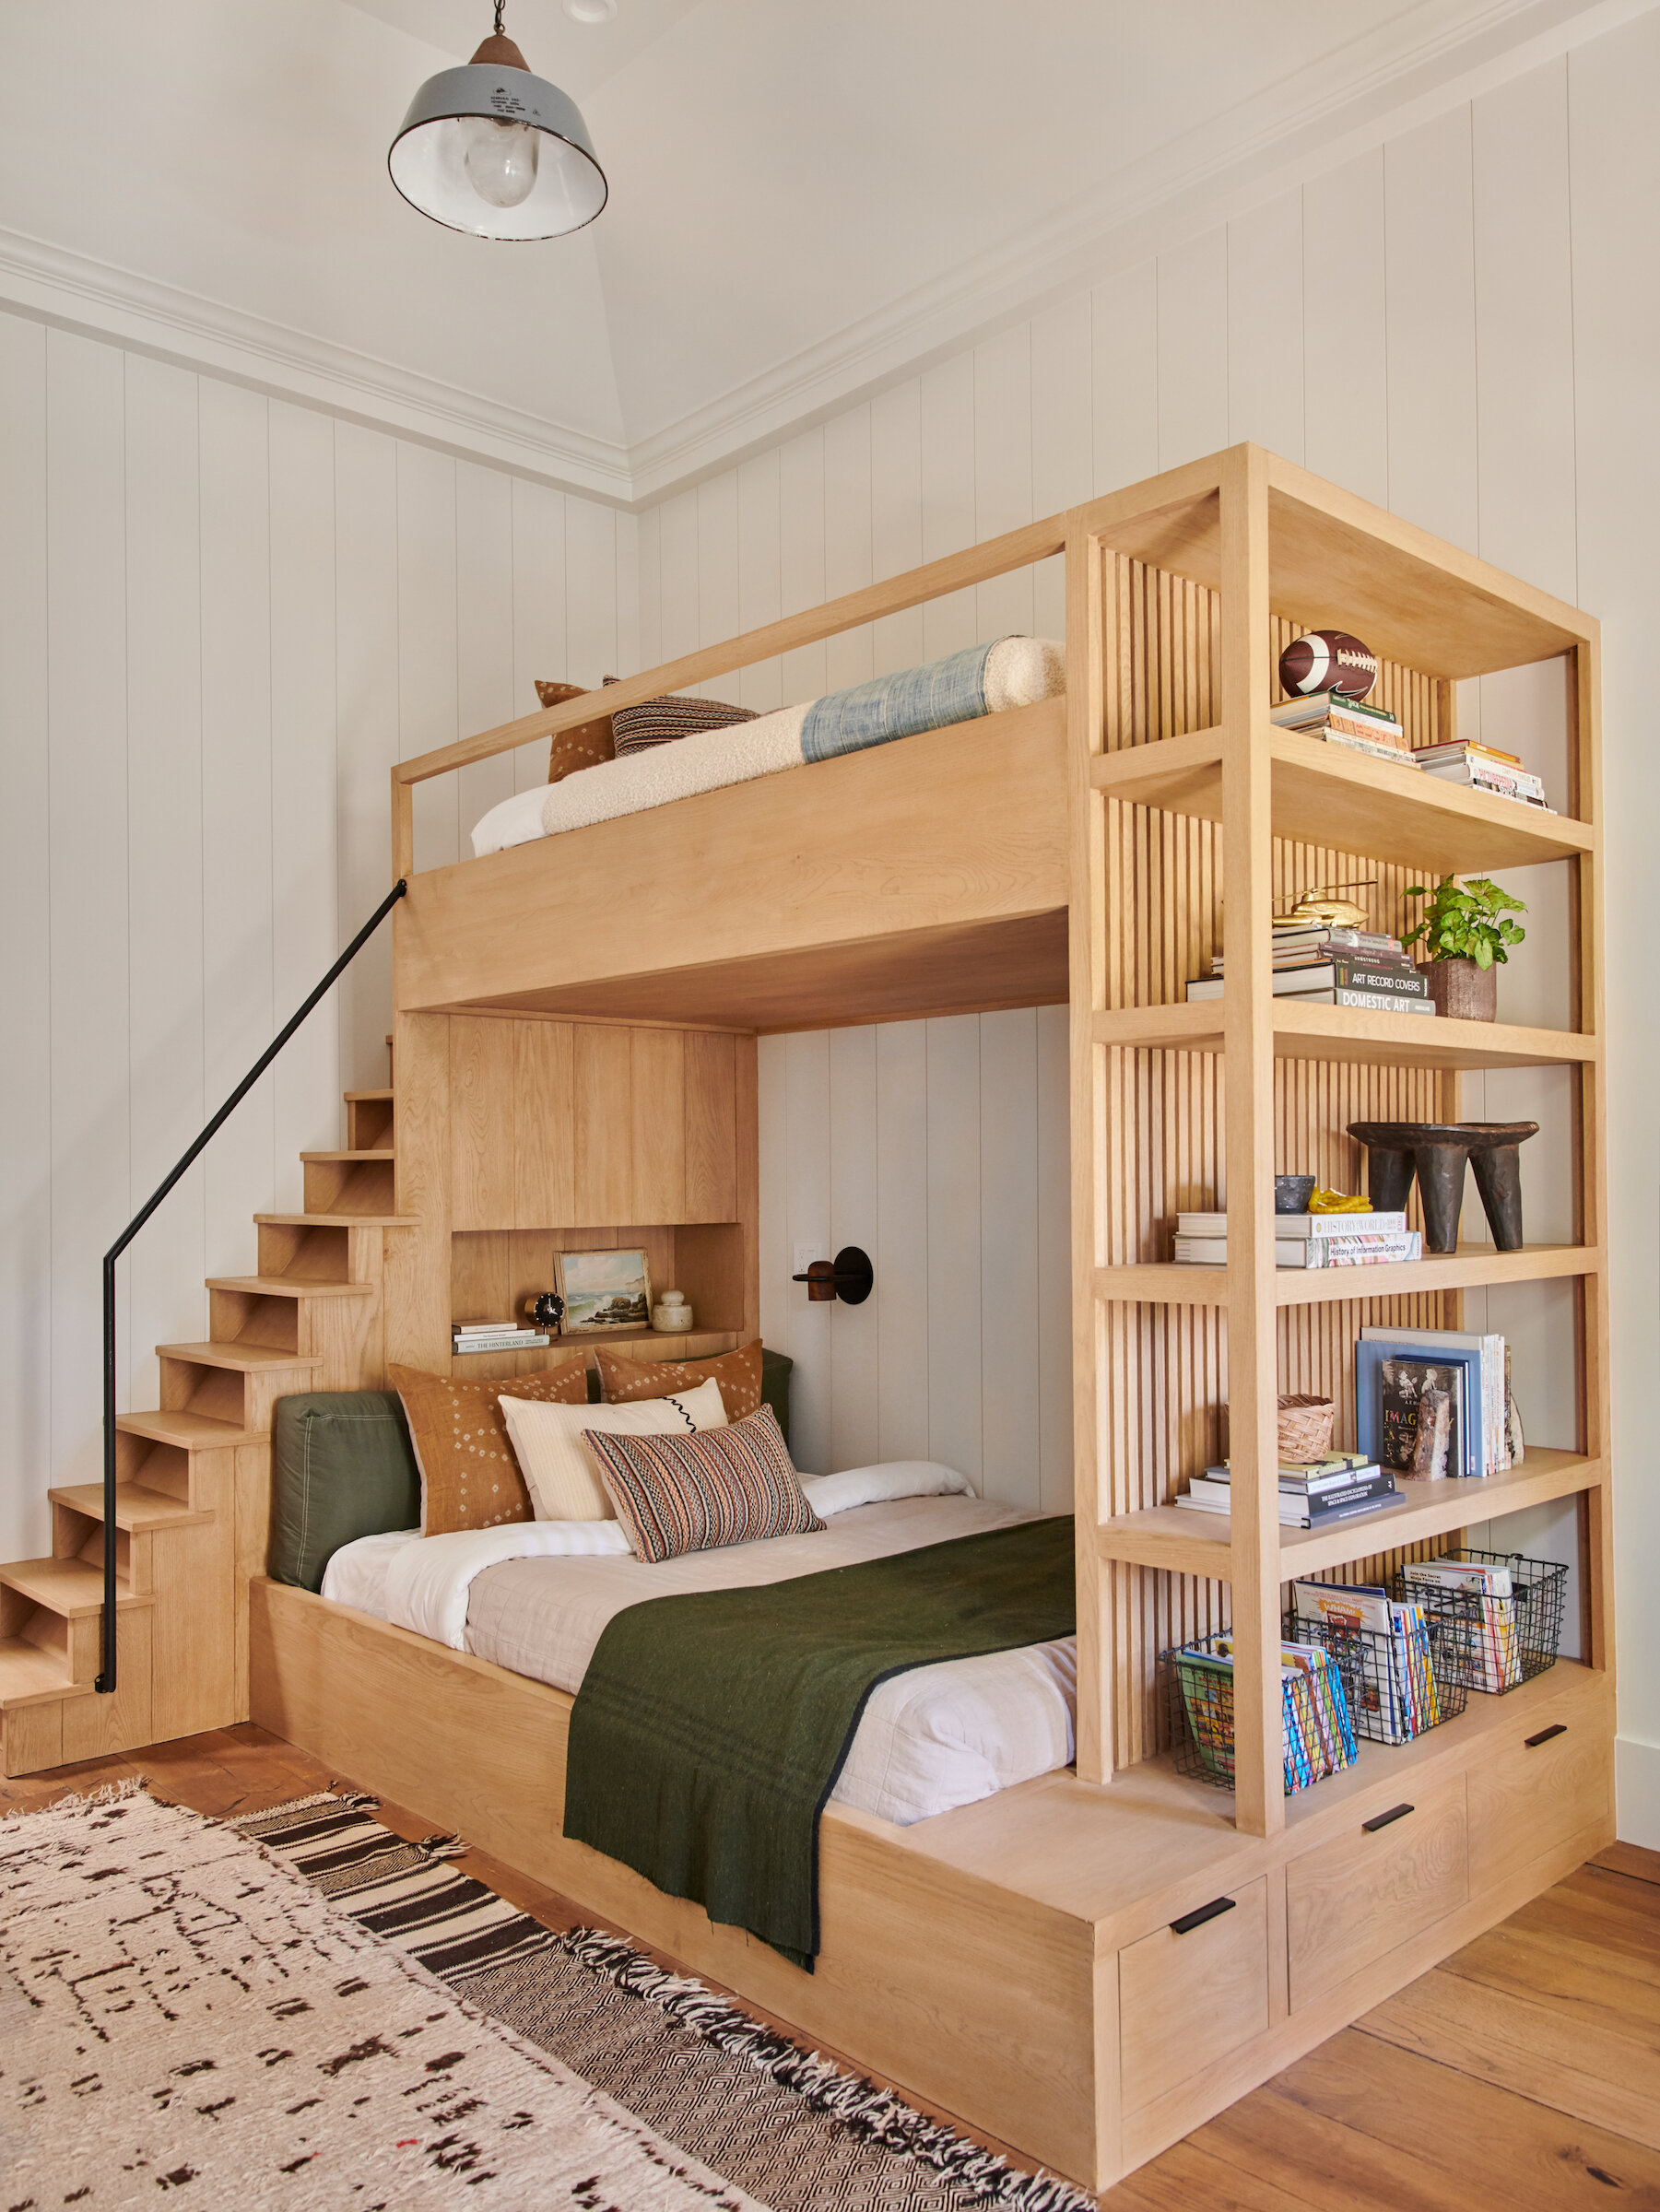 Bunk Bed Round Up Leigh Design, Simple Bunk Bed Design